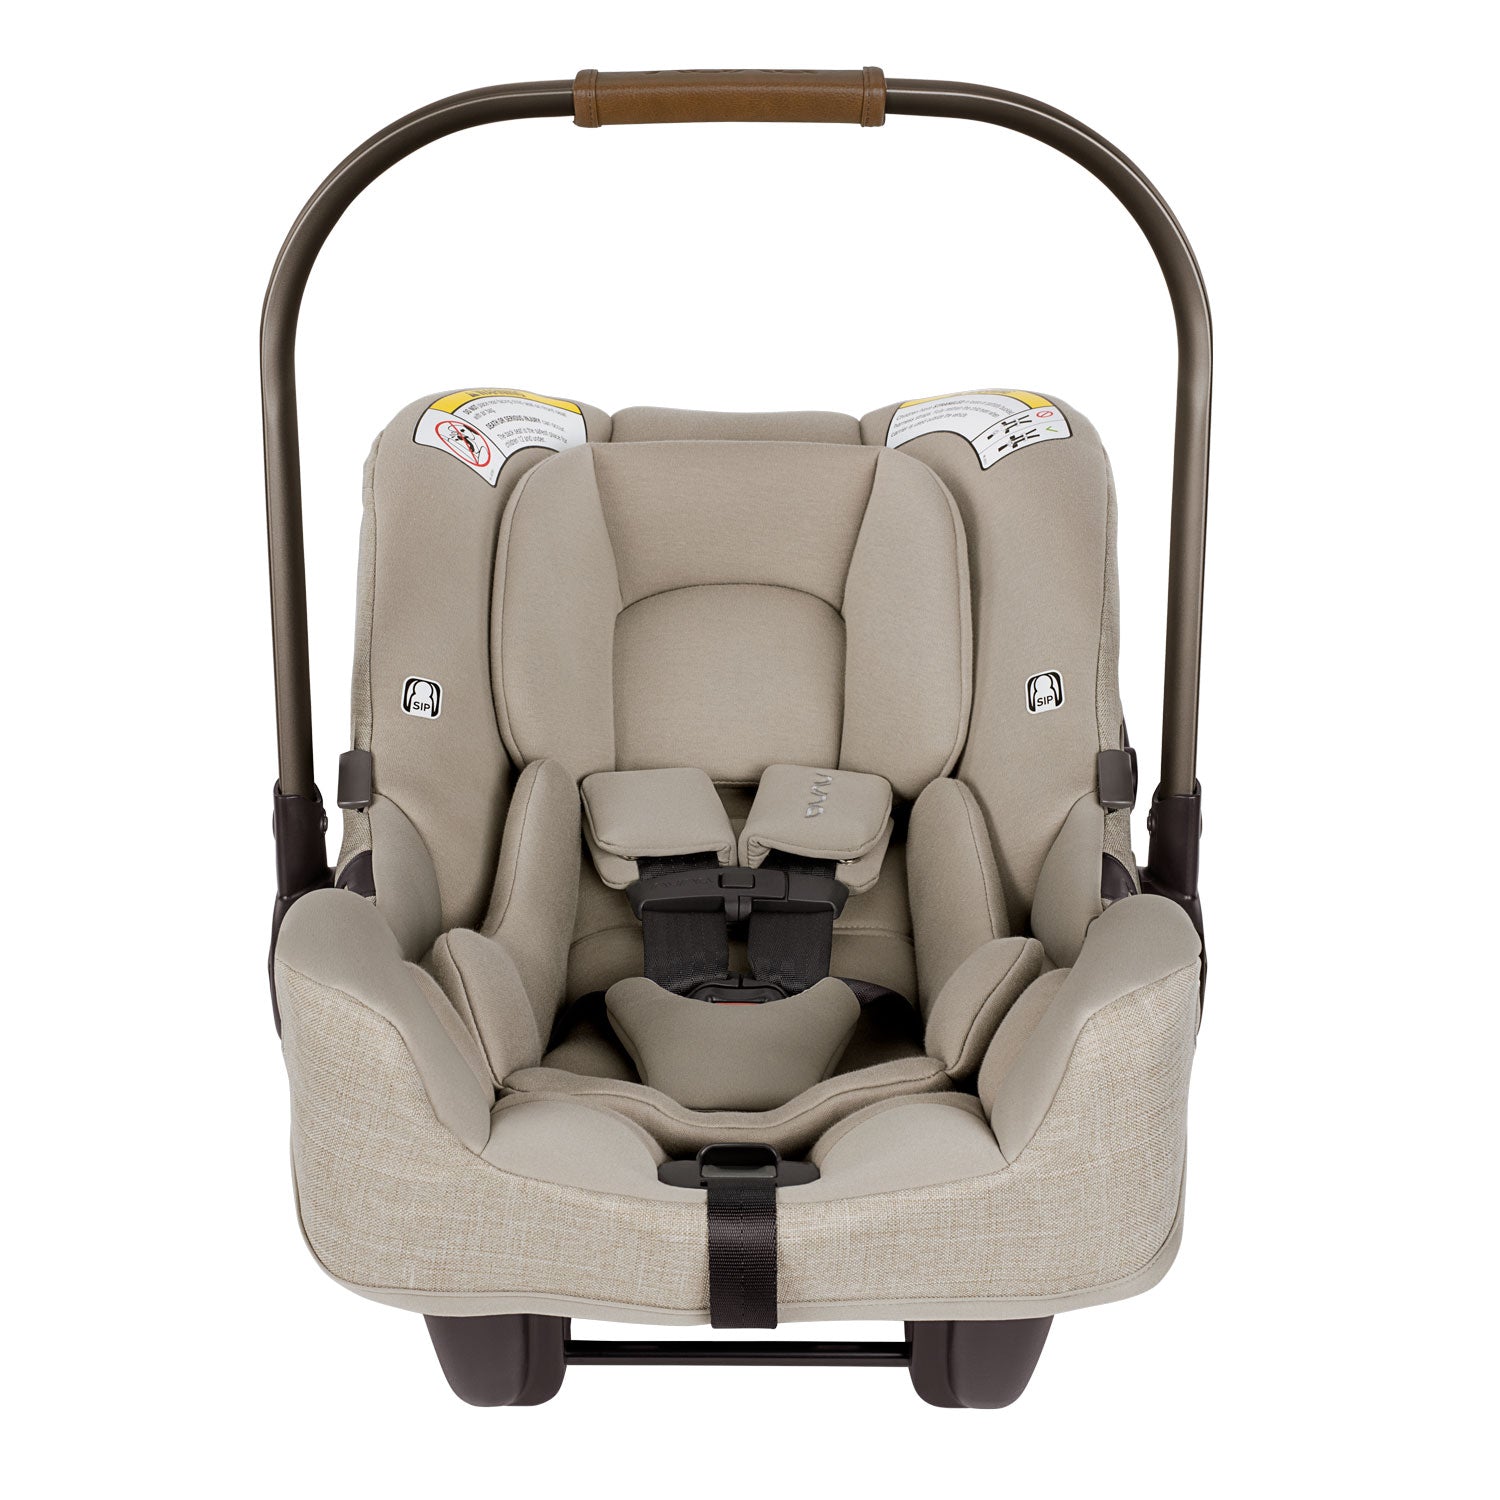 Nuna PIPA RX Infant Car Seat with RELX Base | The Baby Cubby